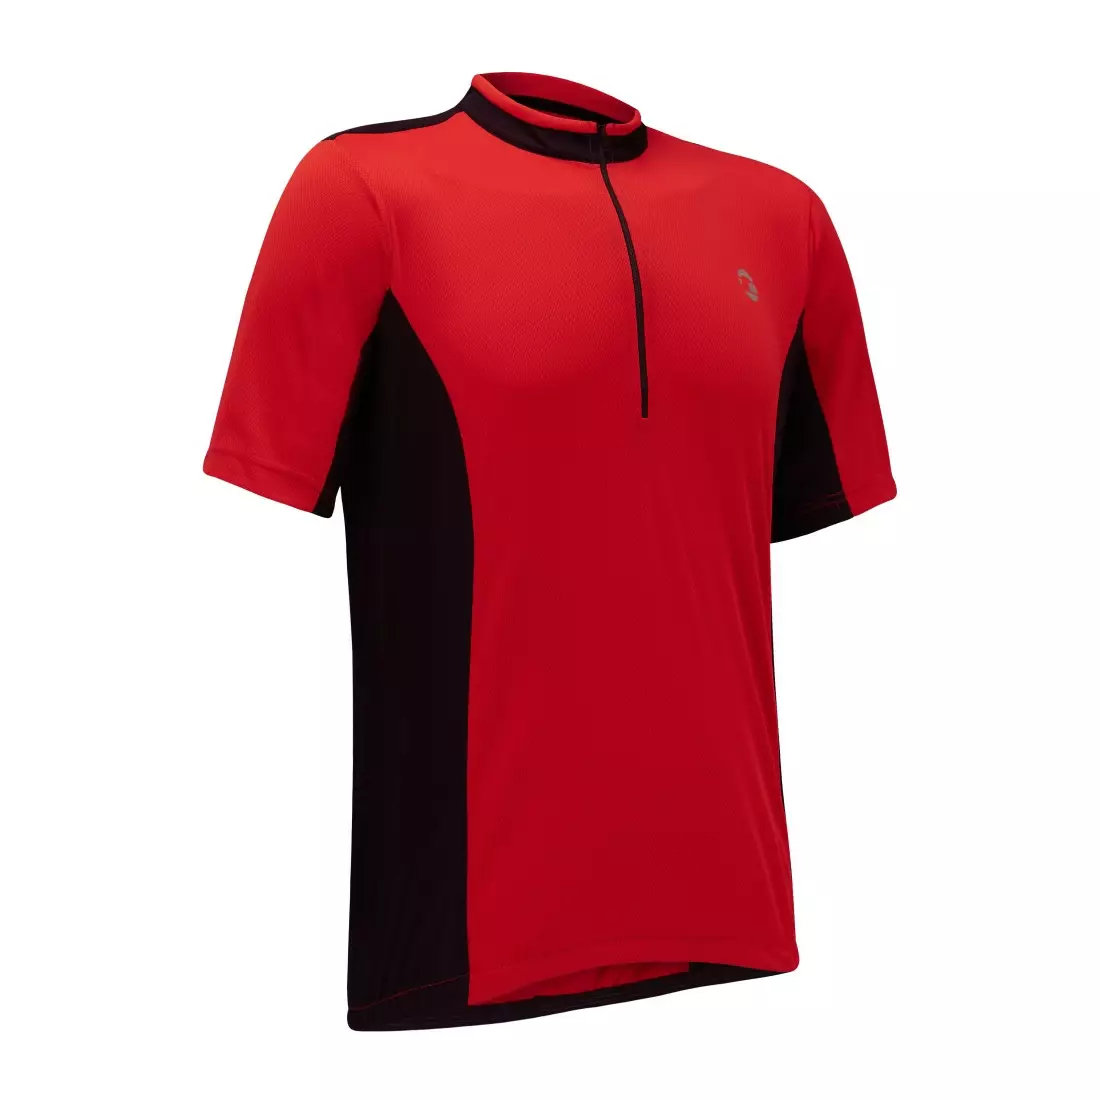 TENN OUTDOORS COOLFLO men's cycling jersey red and black